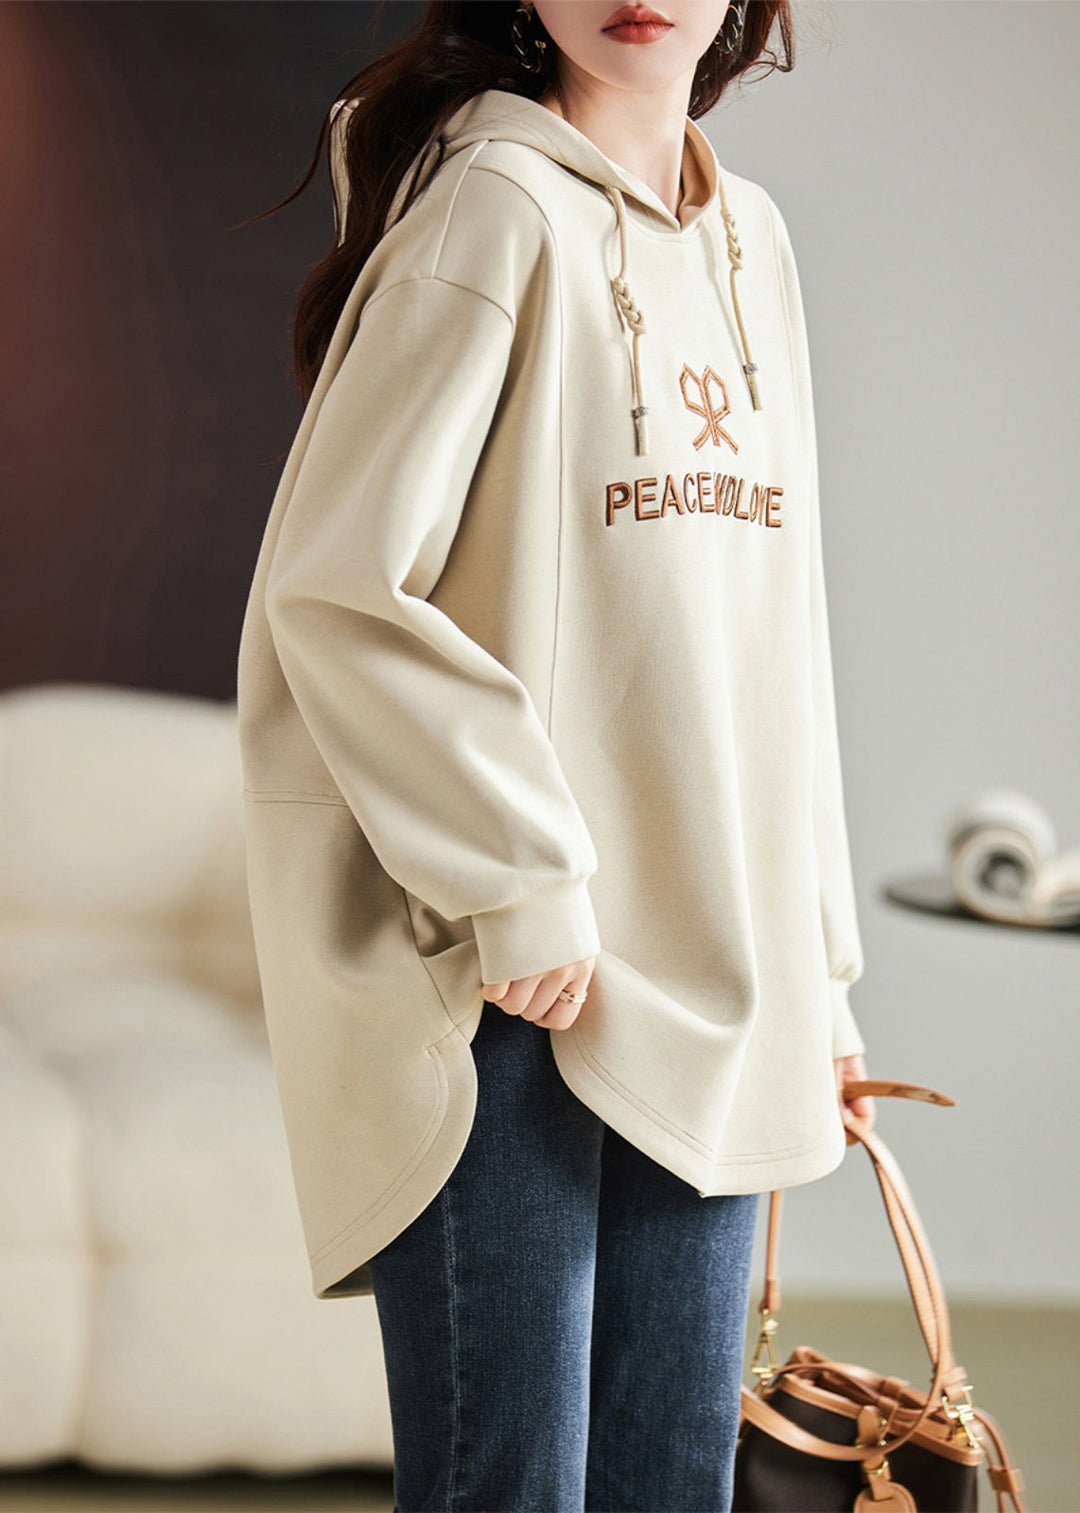 Fashion Apricot Embroideried Cotton Sweatshirts Top Spring